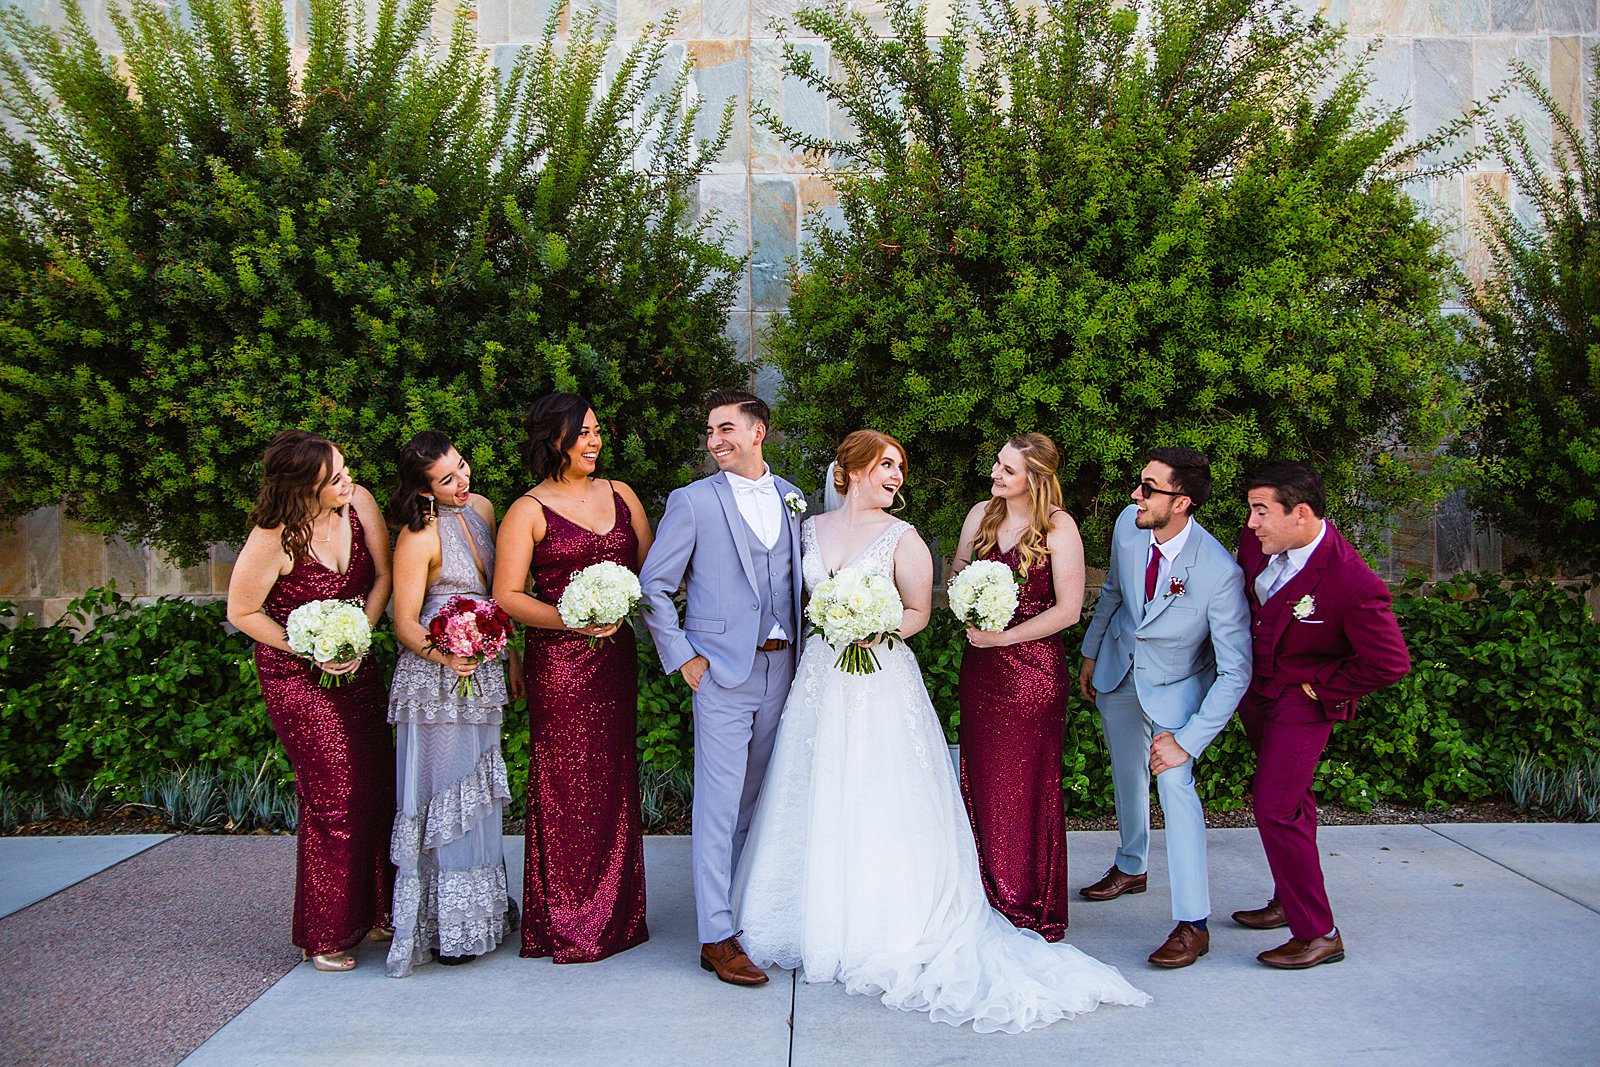 Mixed gender bridal party laughing together at SoHo63 wedding by Chandler wedding photographer PMA Photography.